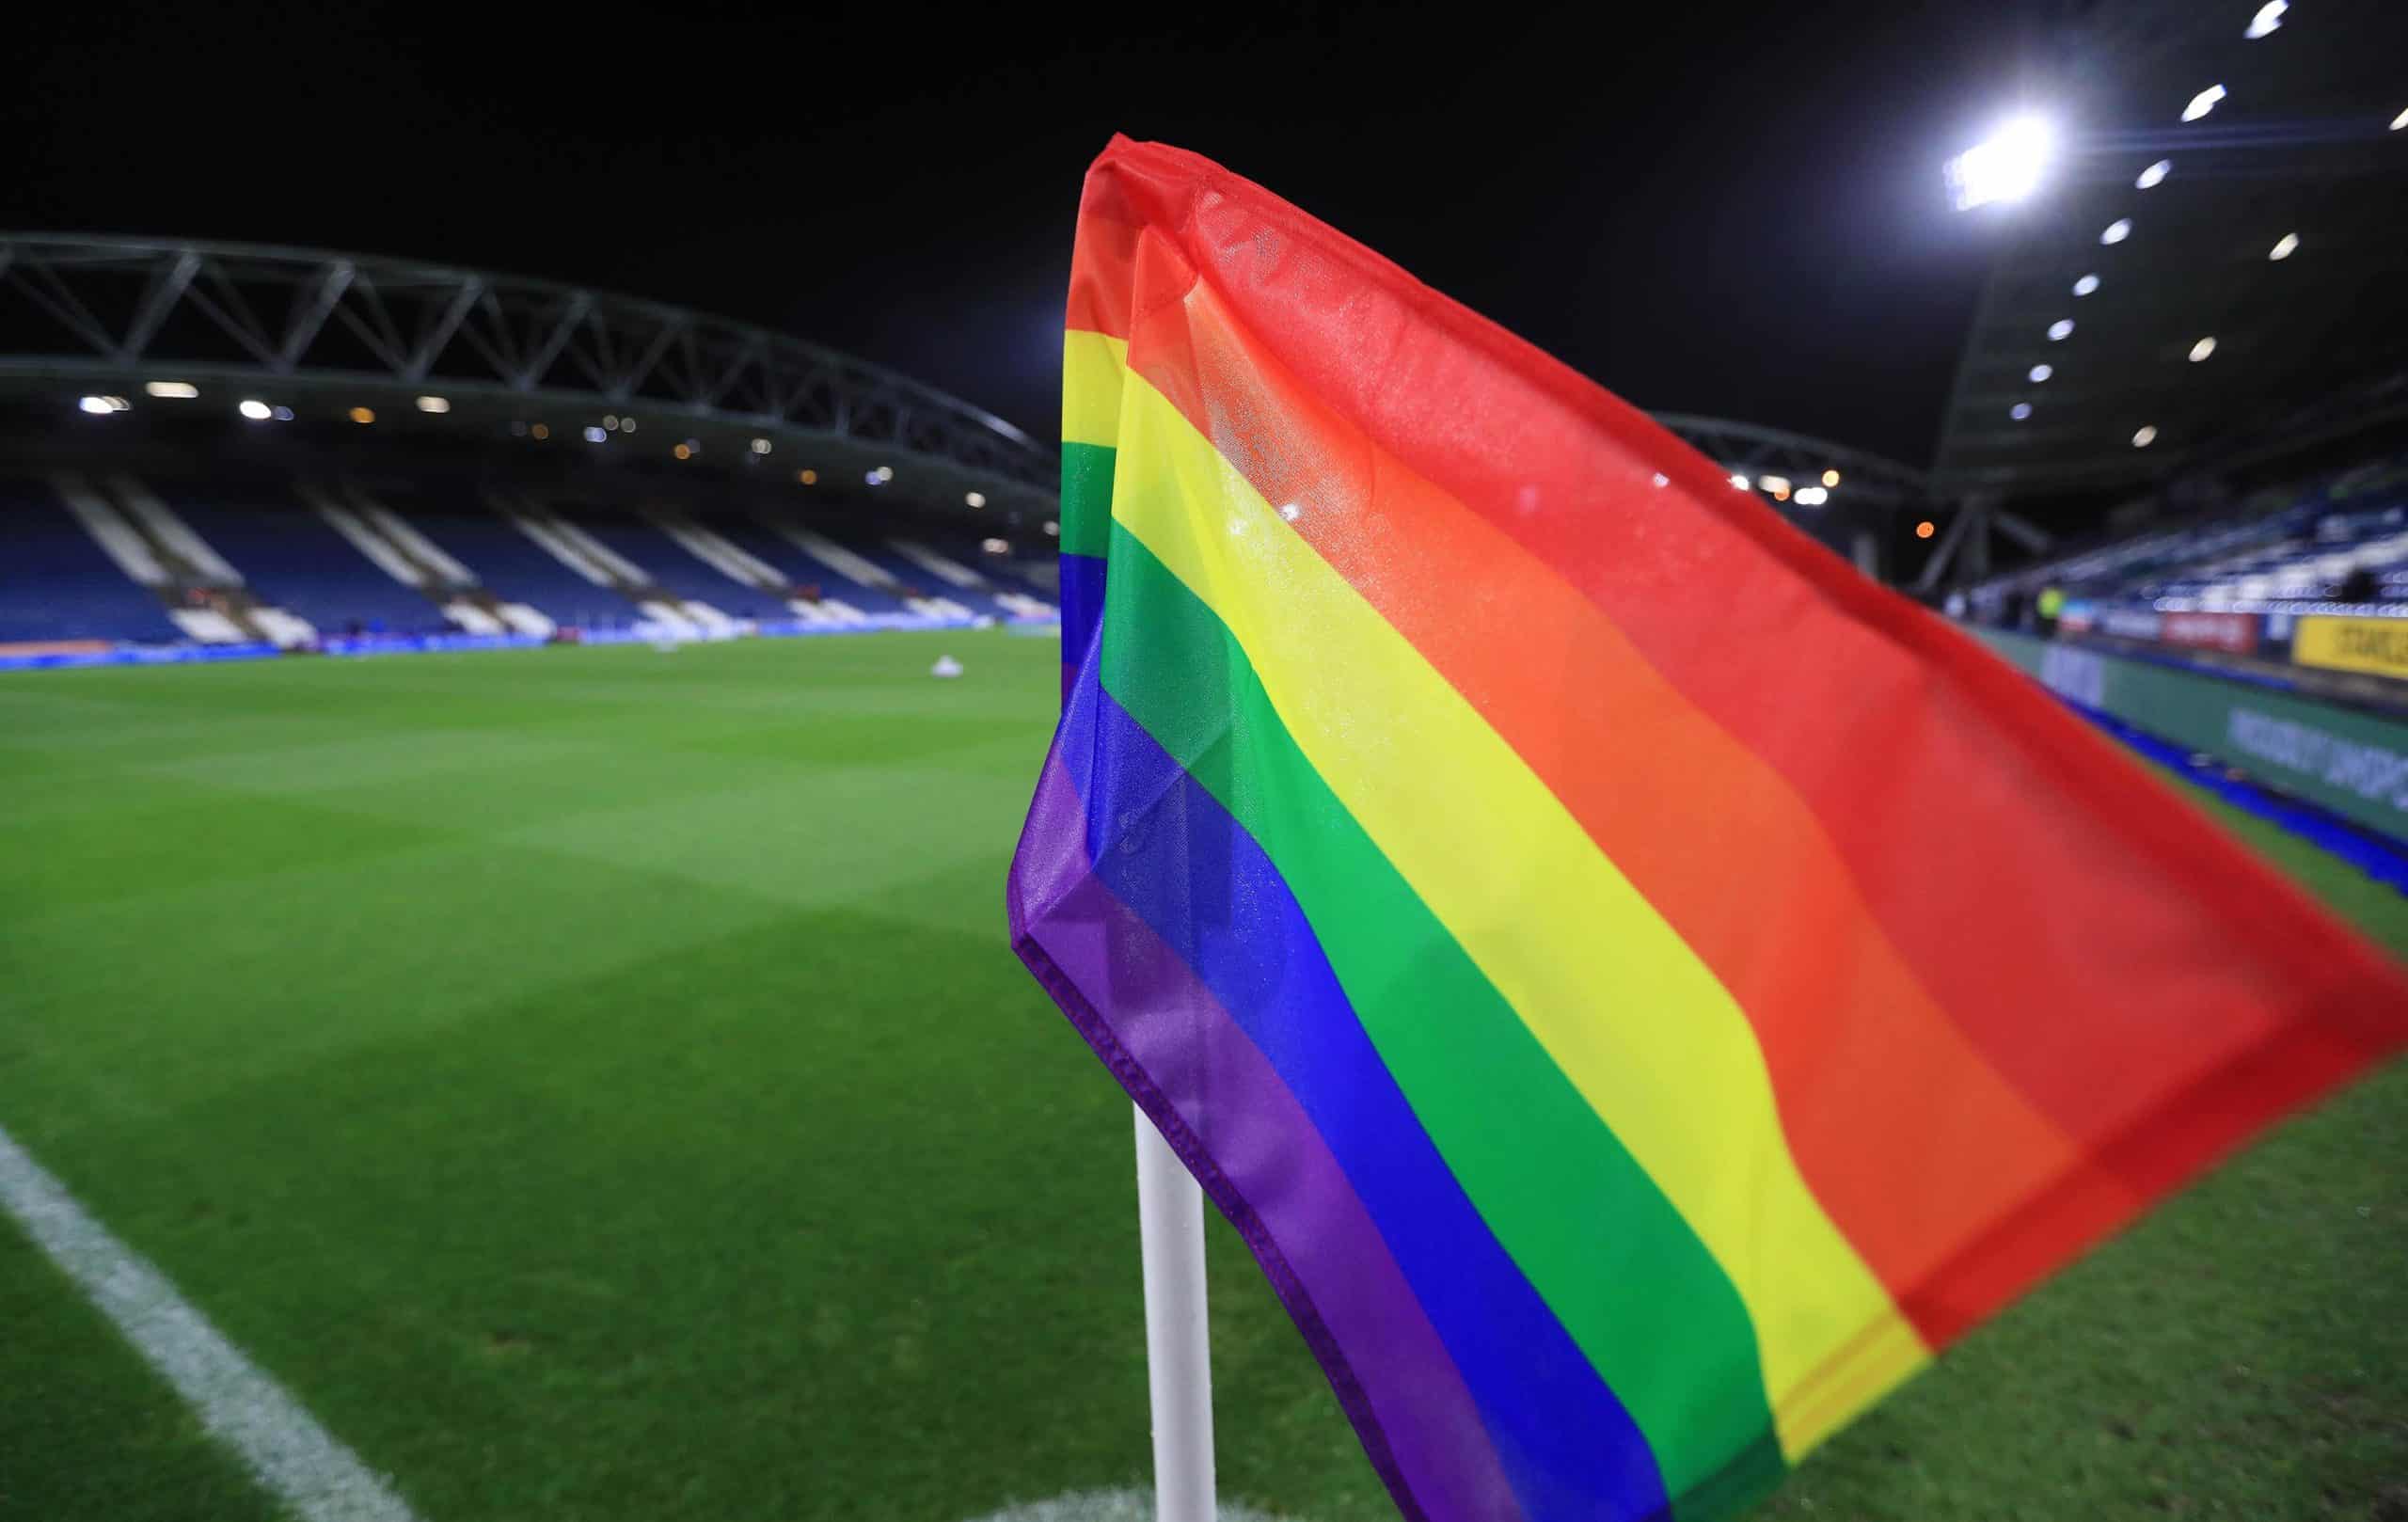 ‘He’s my new hero:’ Britain welcomes openly gay professional footballer